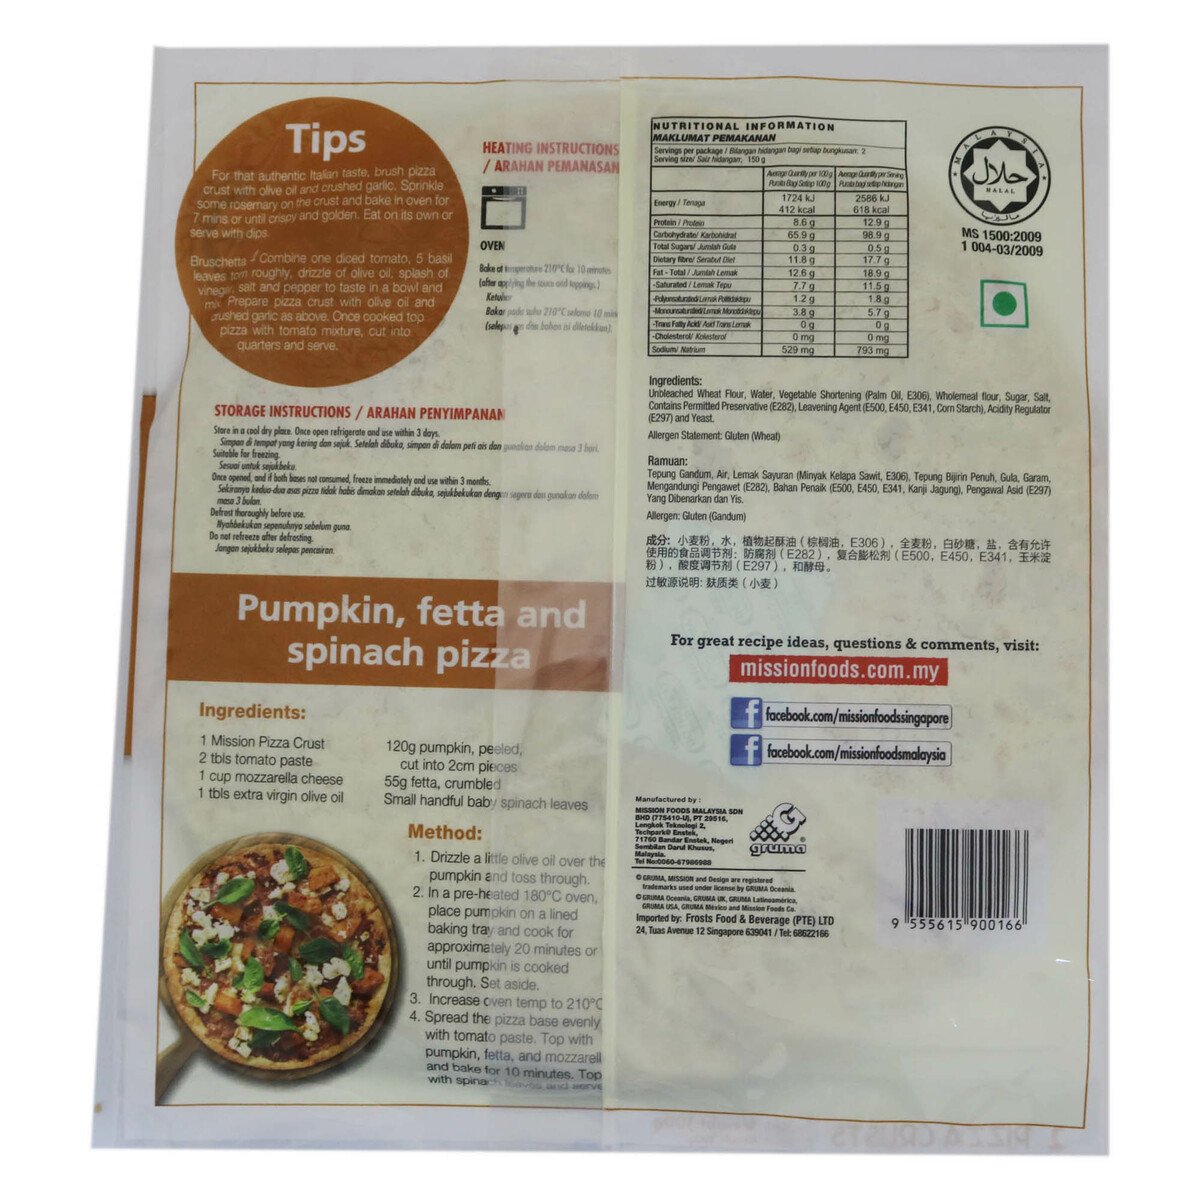 Mission Pizza Crust Wholemeal 300g